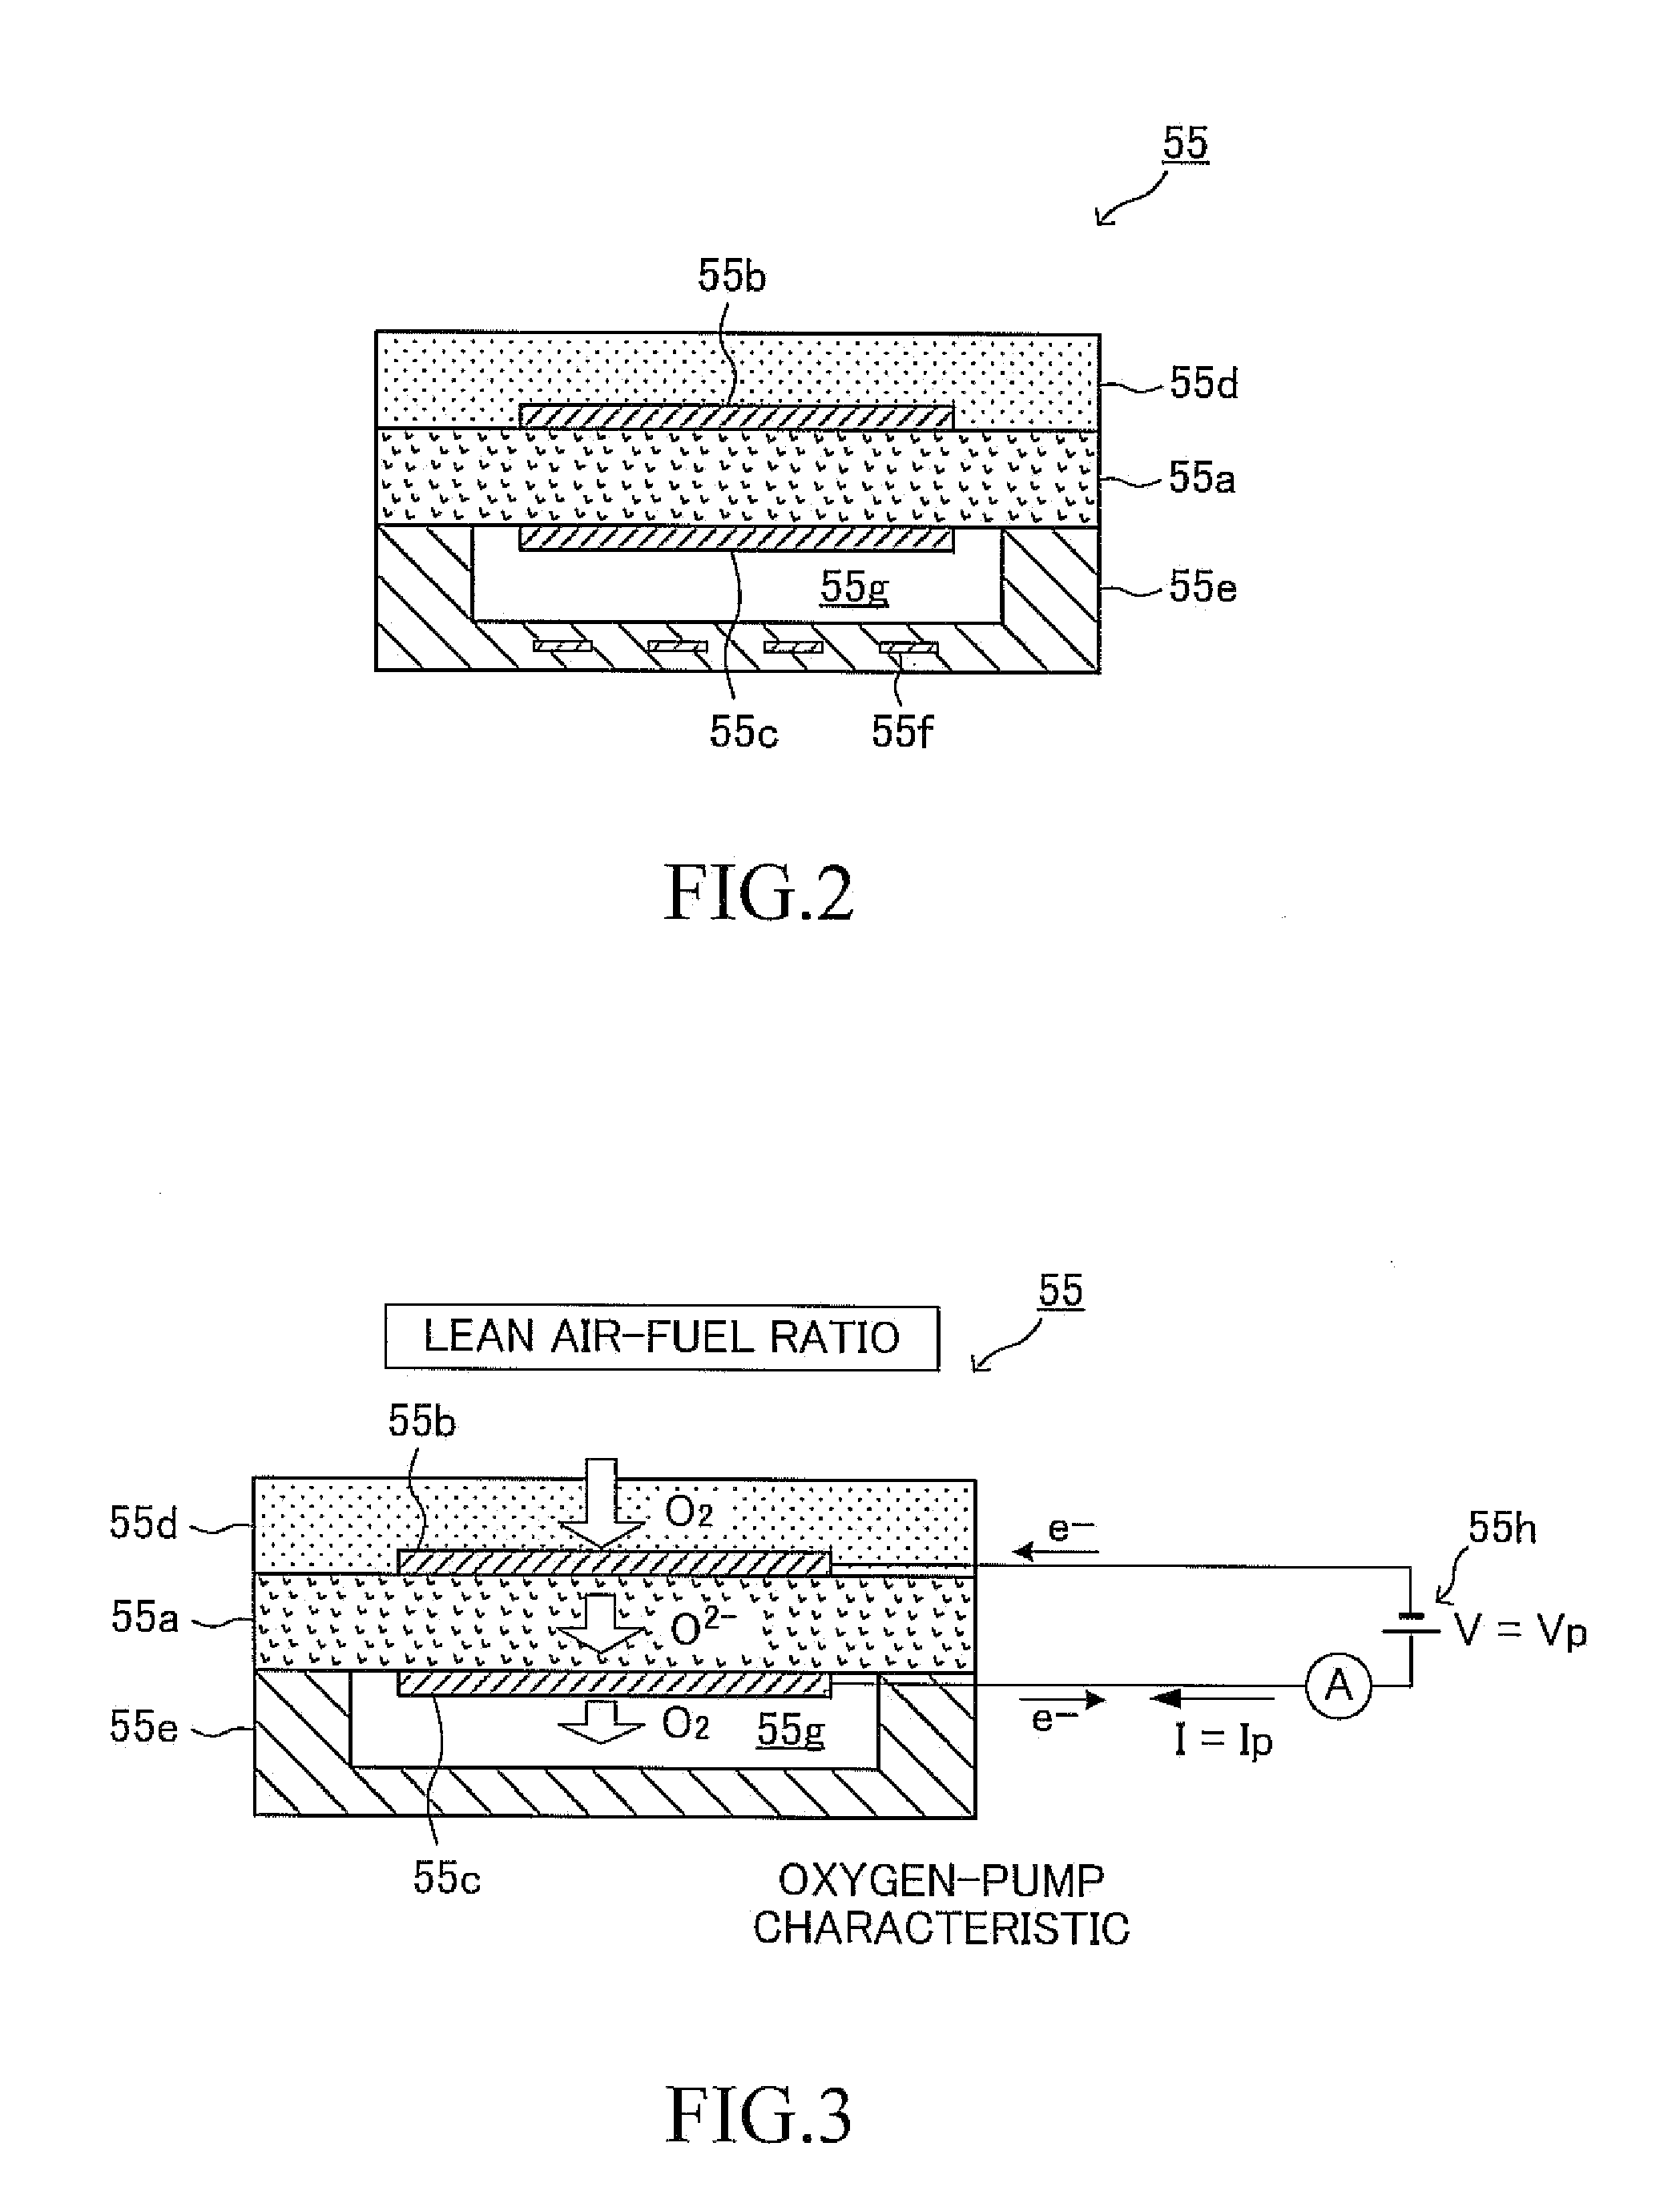 Internal combustion engine system controller